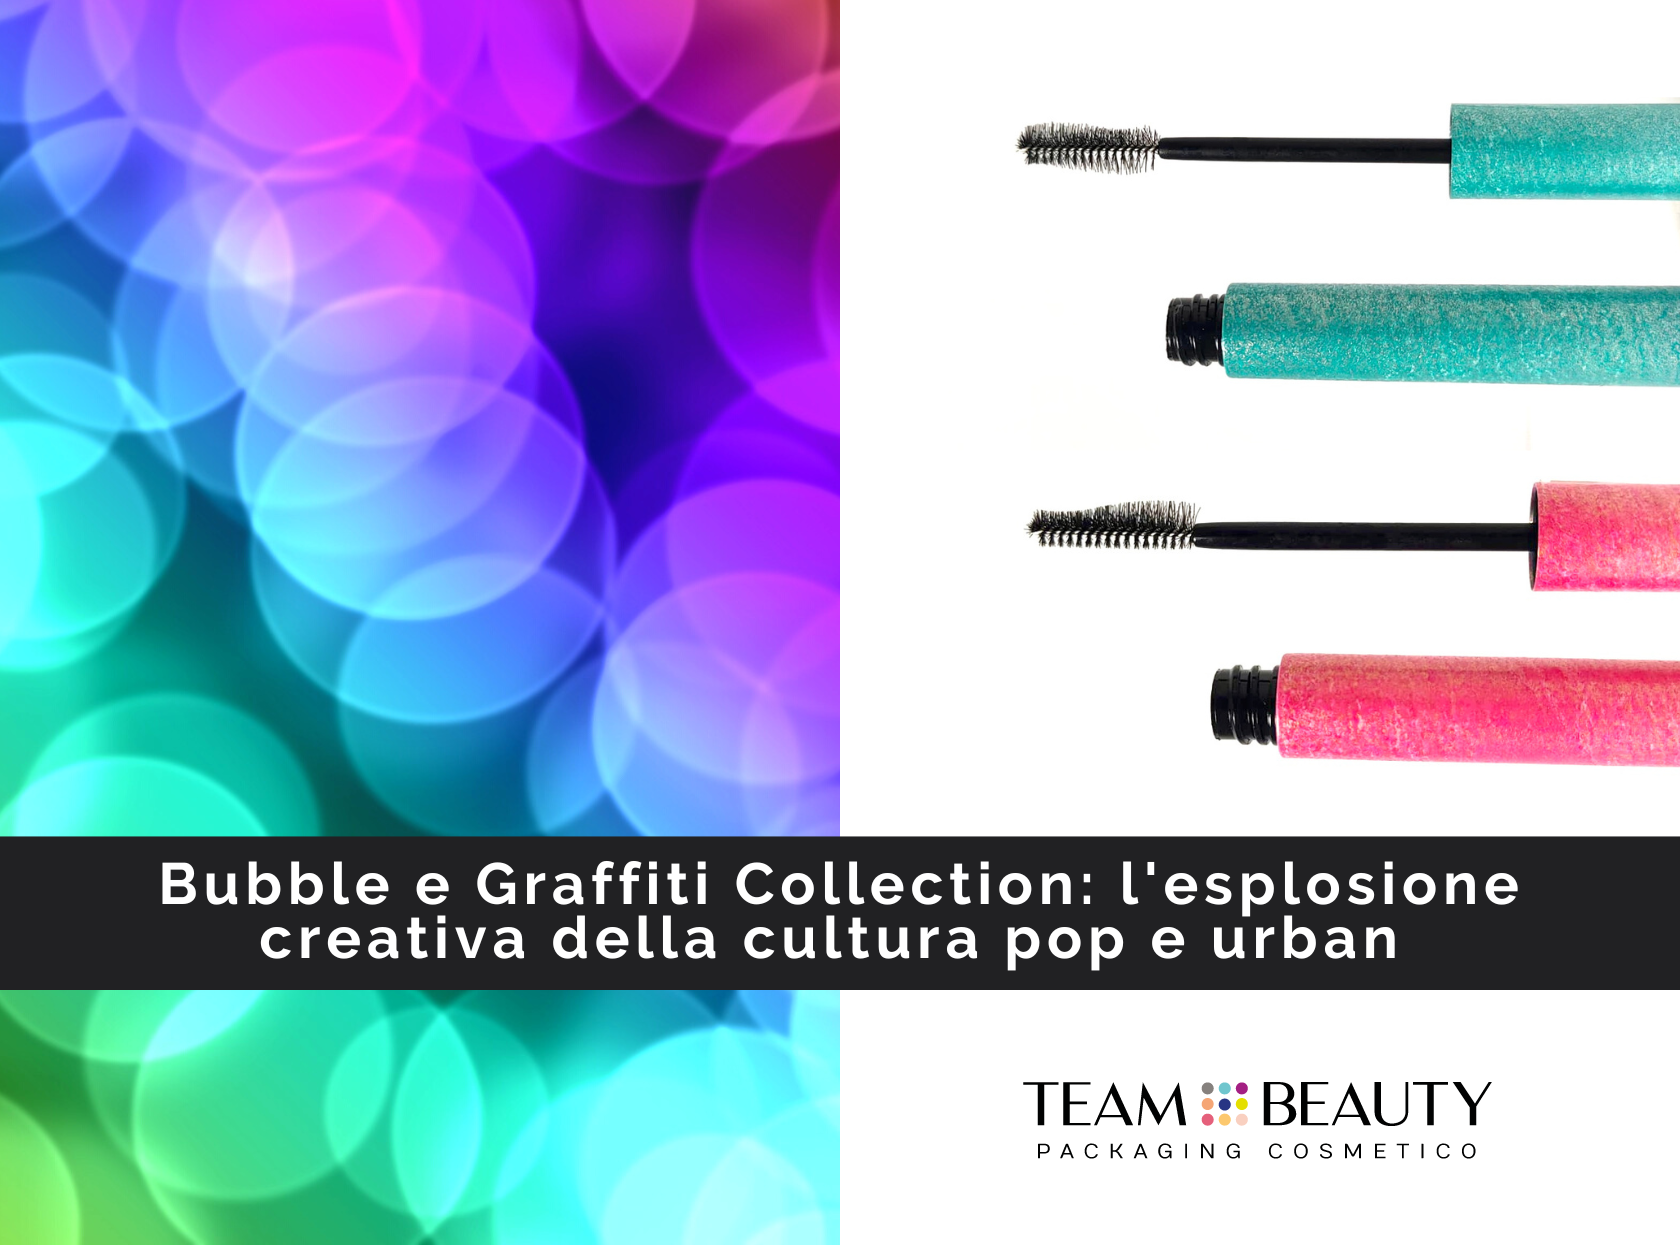 Bubble and Graffiti Collection: a creative explosion of pop and urban culture